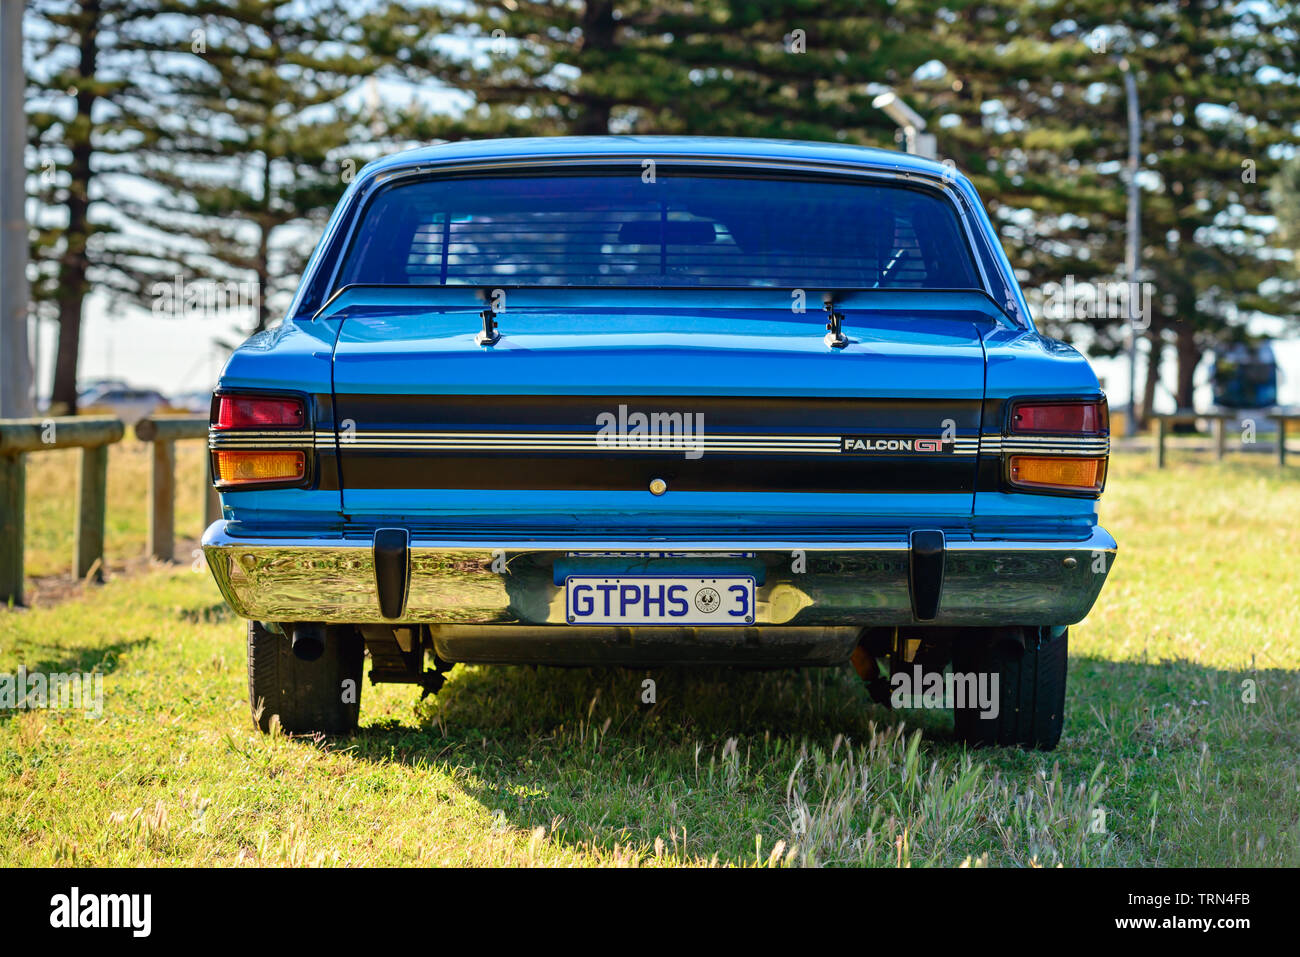 Port Adelaide, South Australia - October 14, 2017: Rear view of iconic Australian made Ford Falcon 351-GT parked on the grass on a day Stock Photo